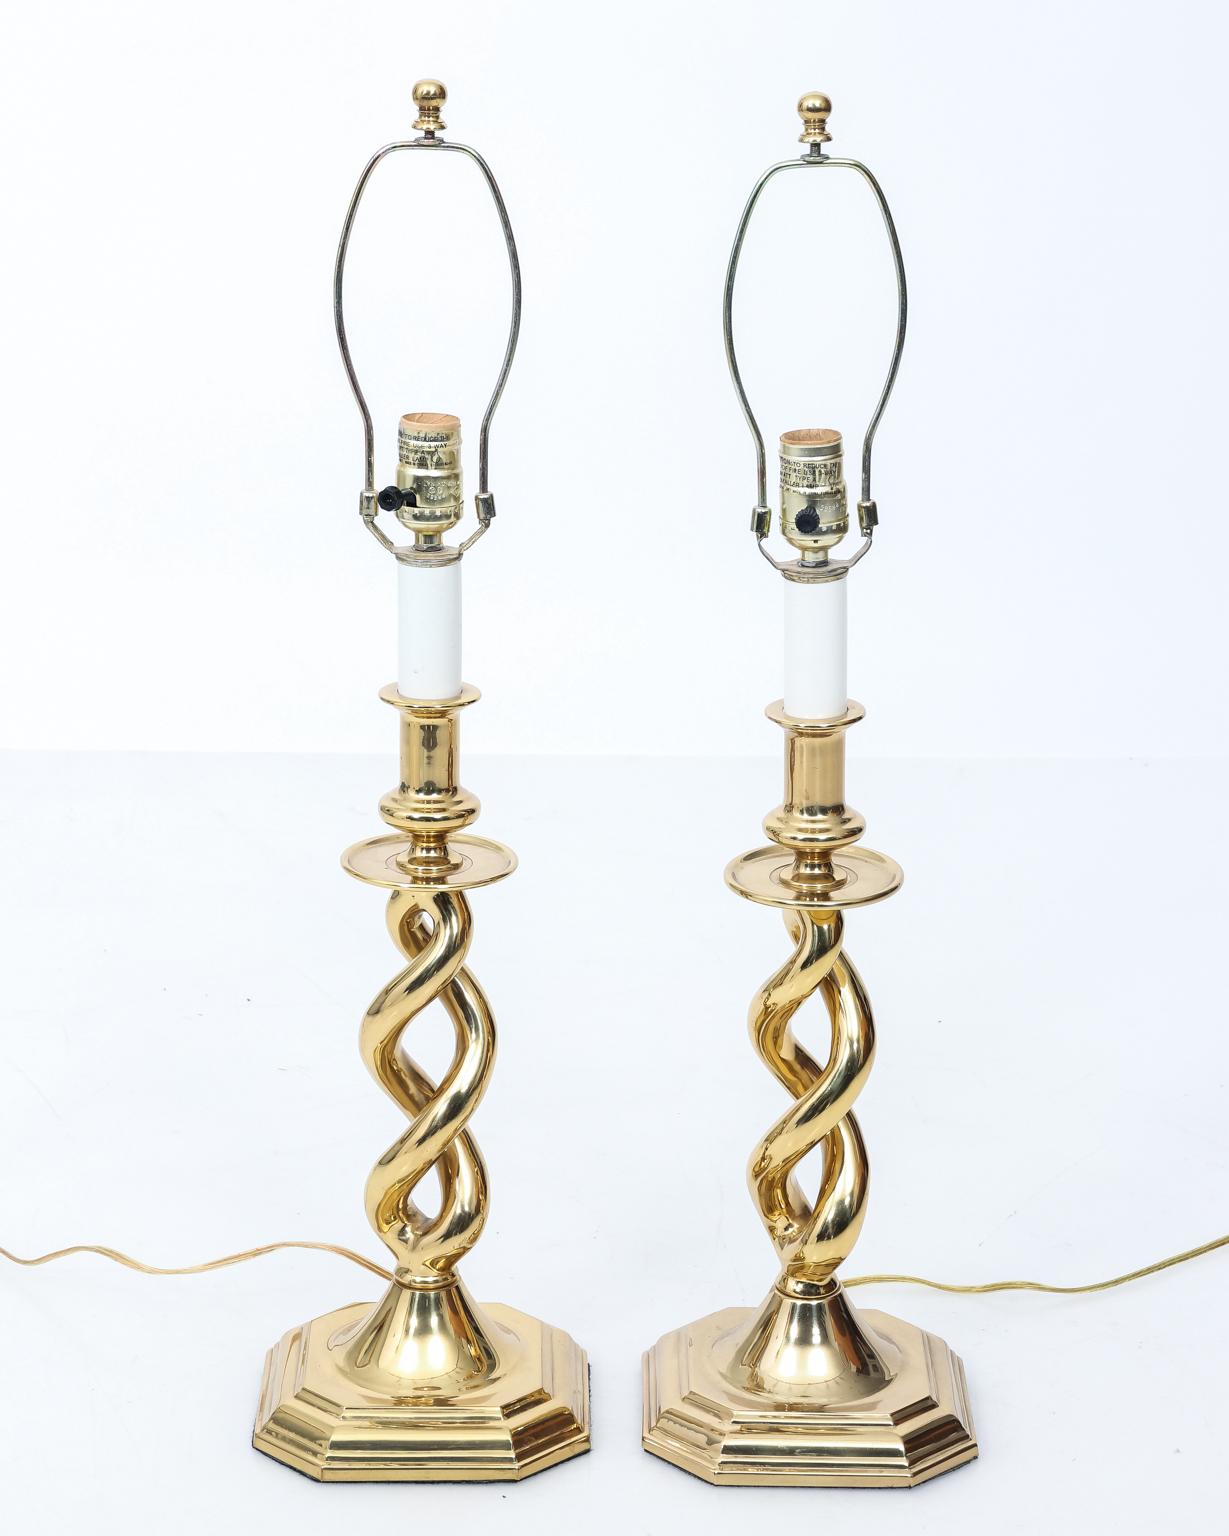 Polished Pair of Brass Barley Twist Table Lamps